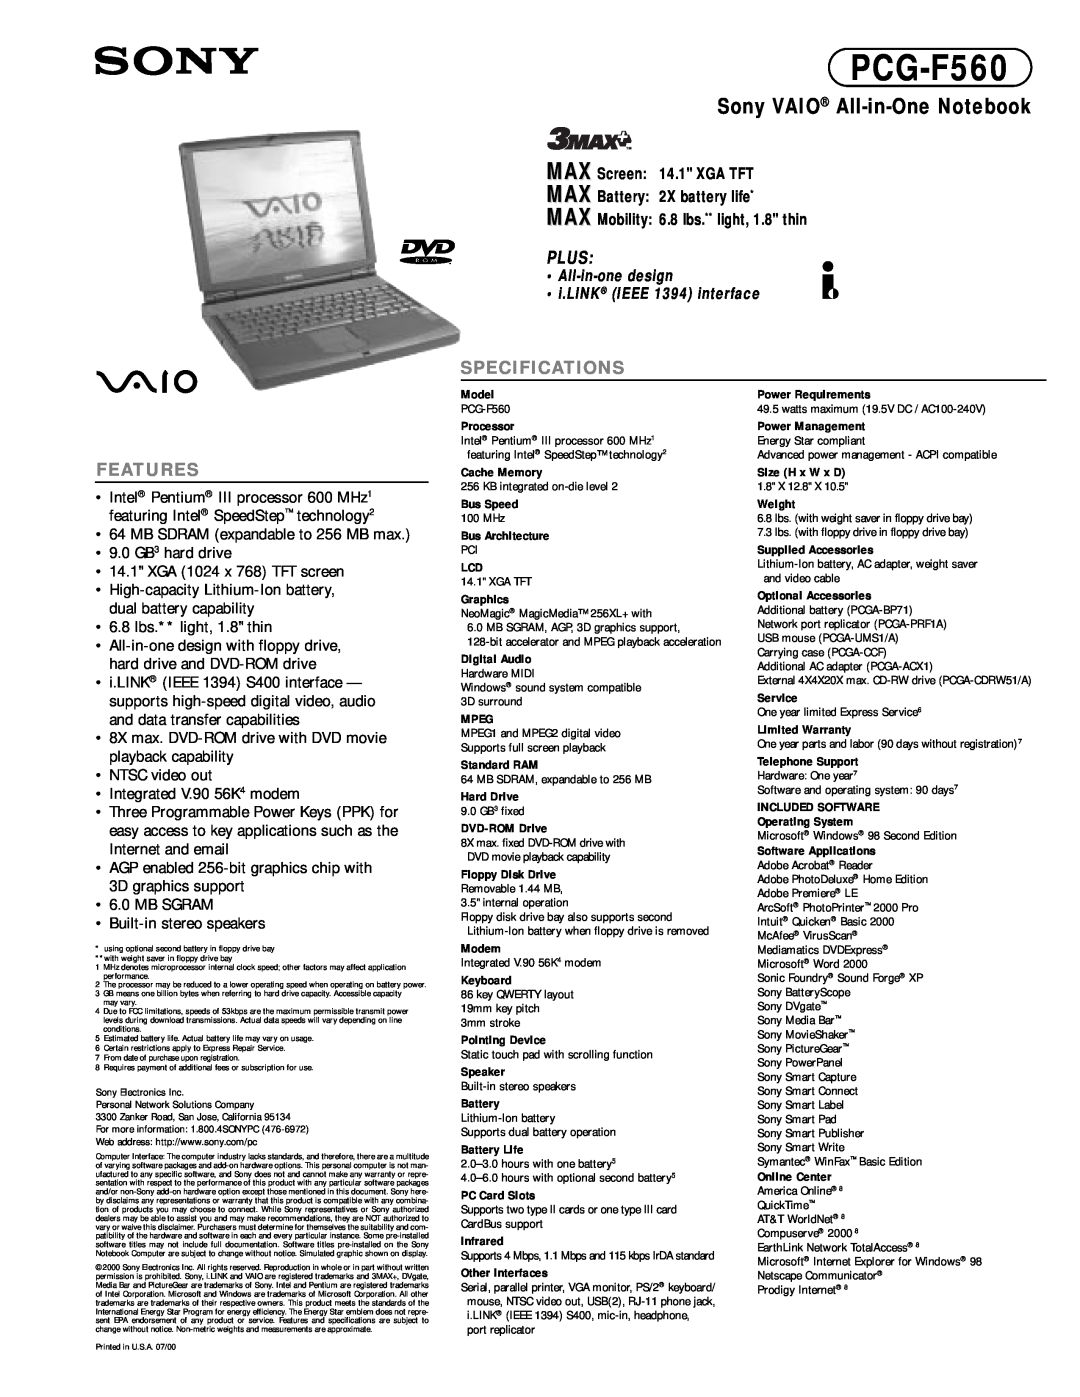 Sony PCG-F560 specifications Sony VAIO All-in-One Notebook, Plus, Specifications, Features, XGA 1024 x 768 TFT screen 